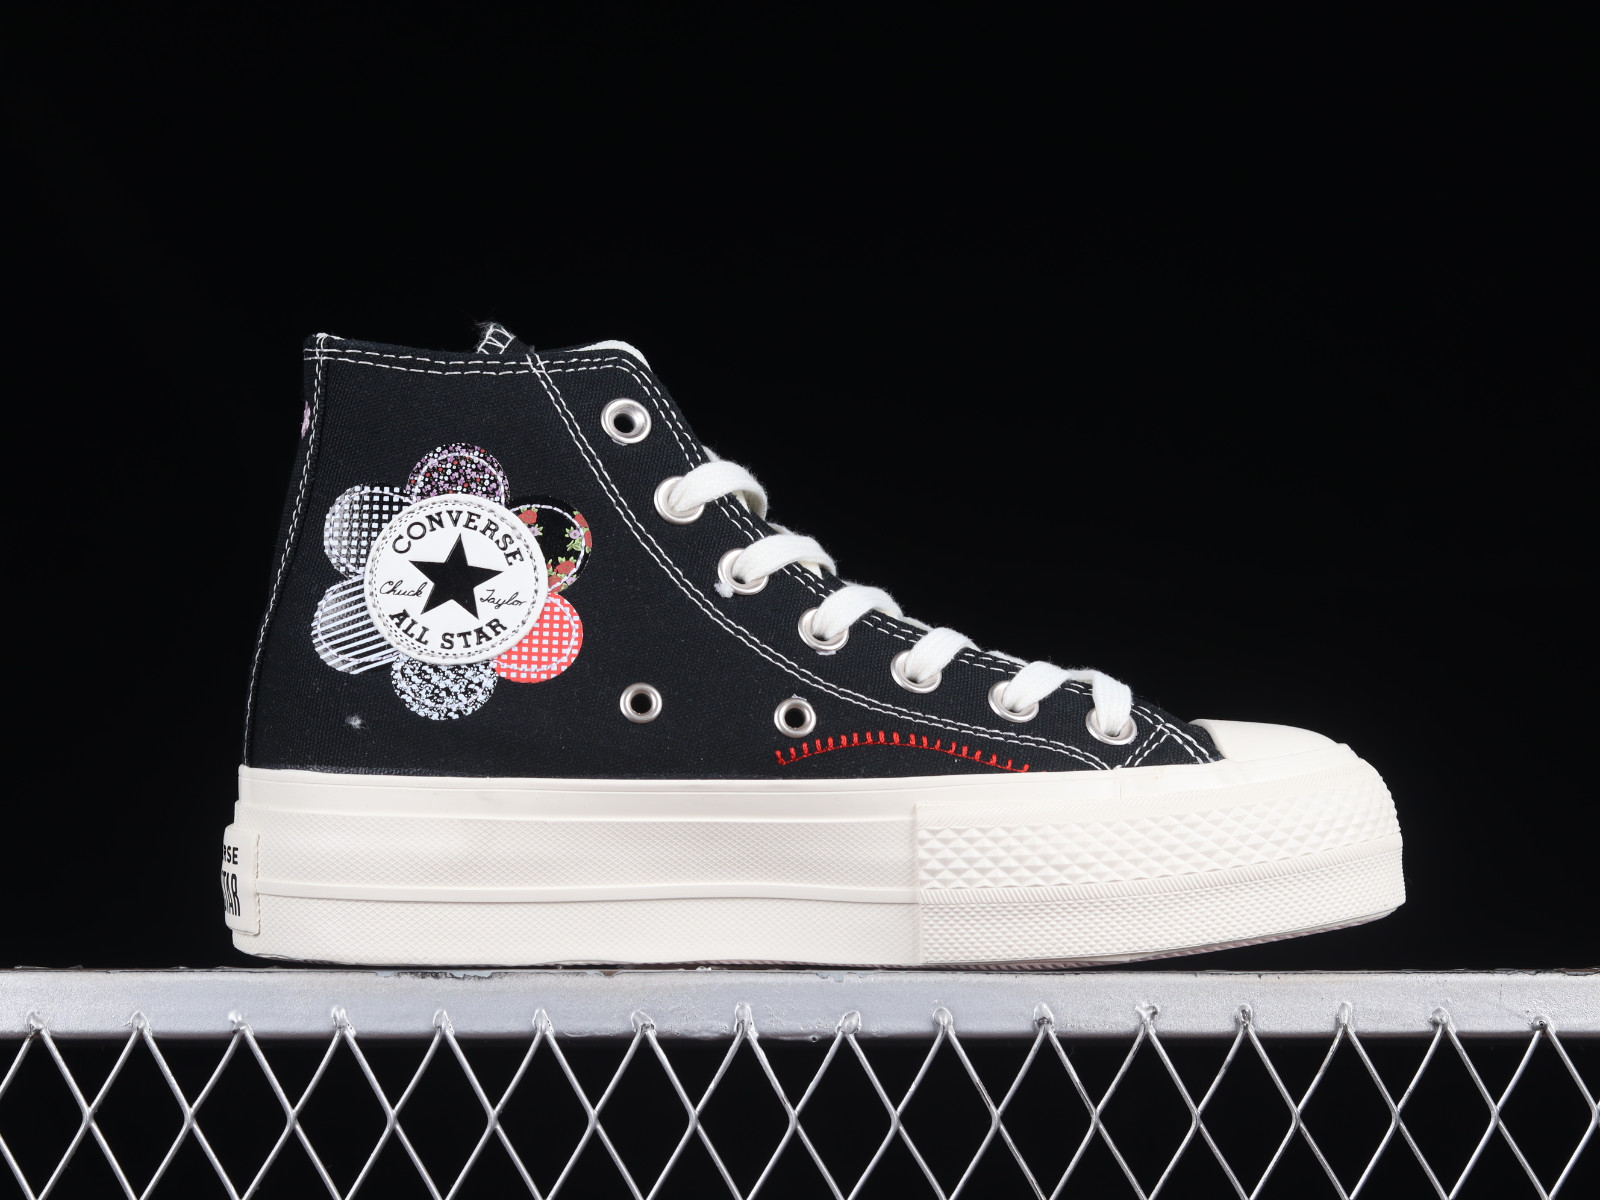 RvceShops - Converse Chuck Taylor All Star Lift Shoes hn6d0-8873 Crafted  Patchwork Black A05194C - Autumn Winter shoes hn6d0-8873 778